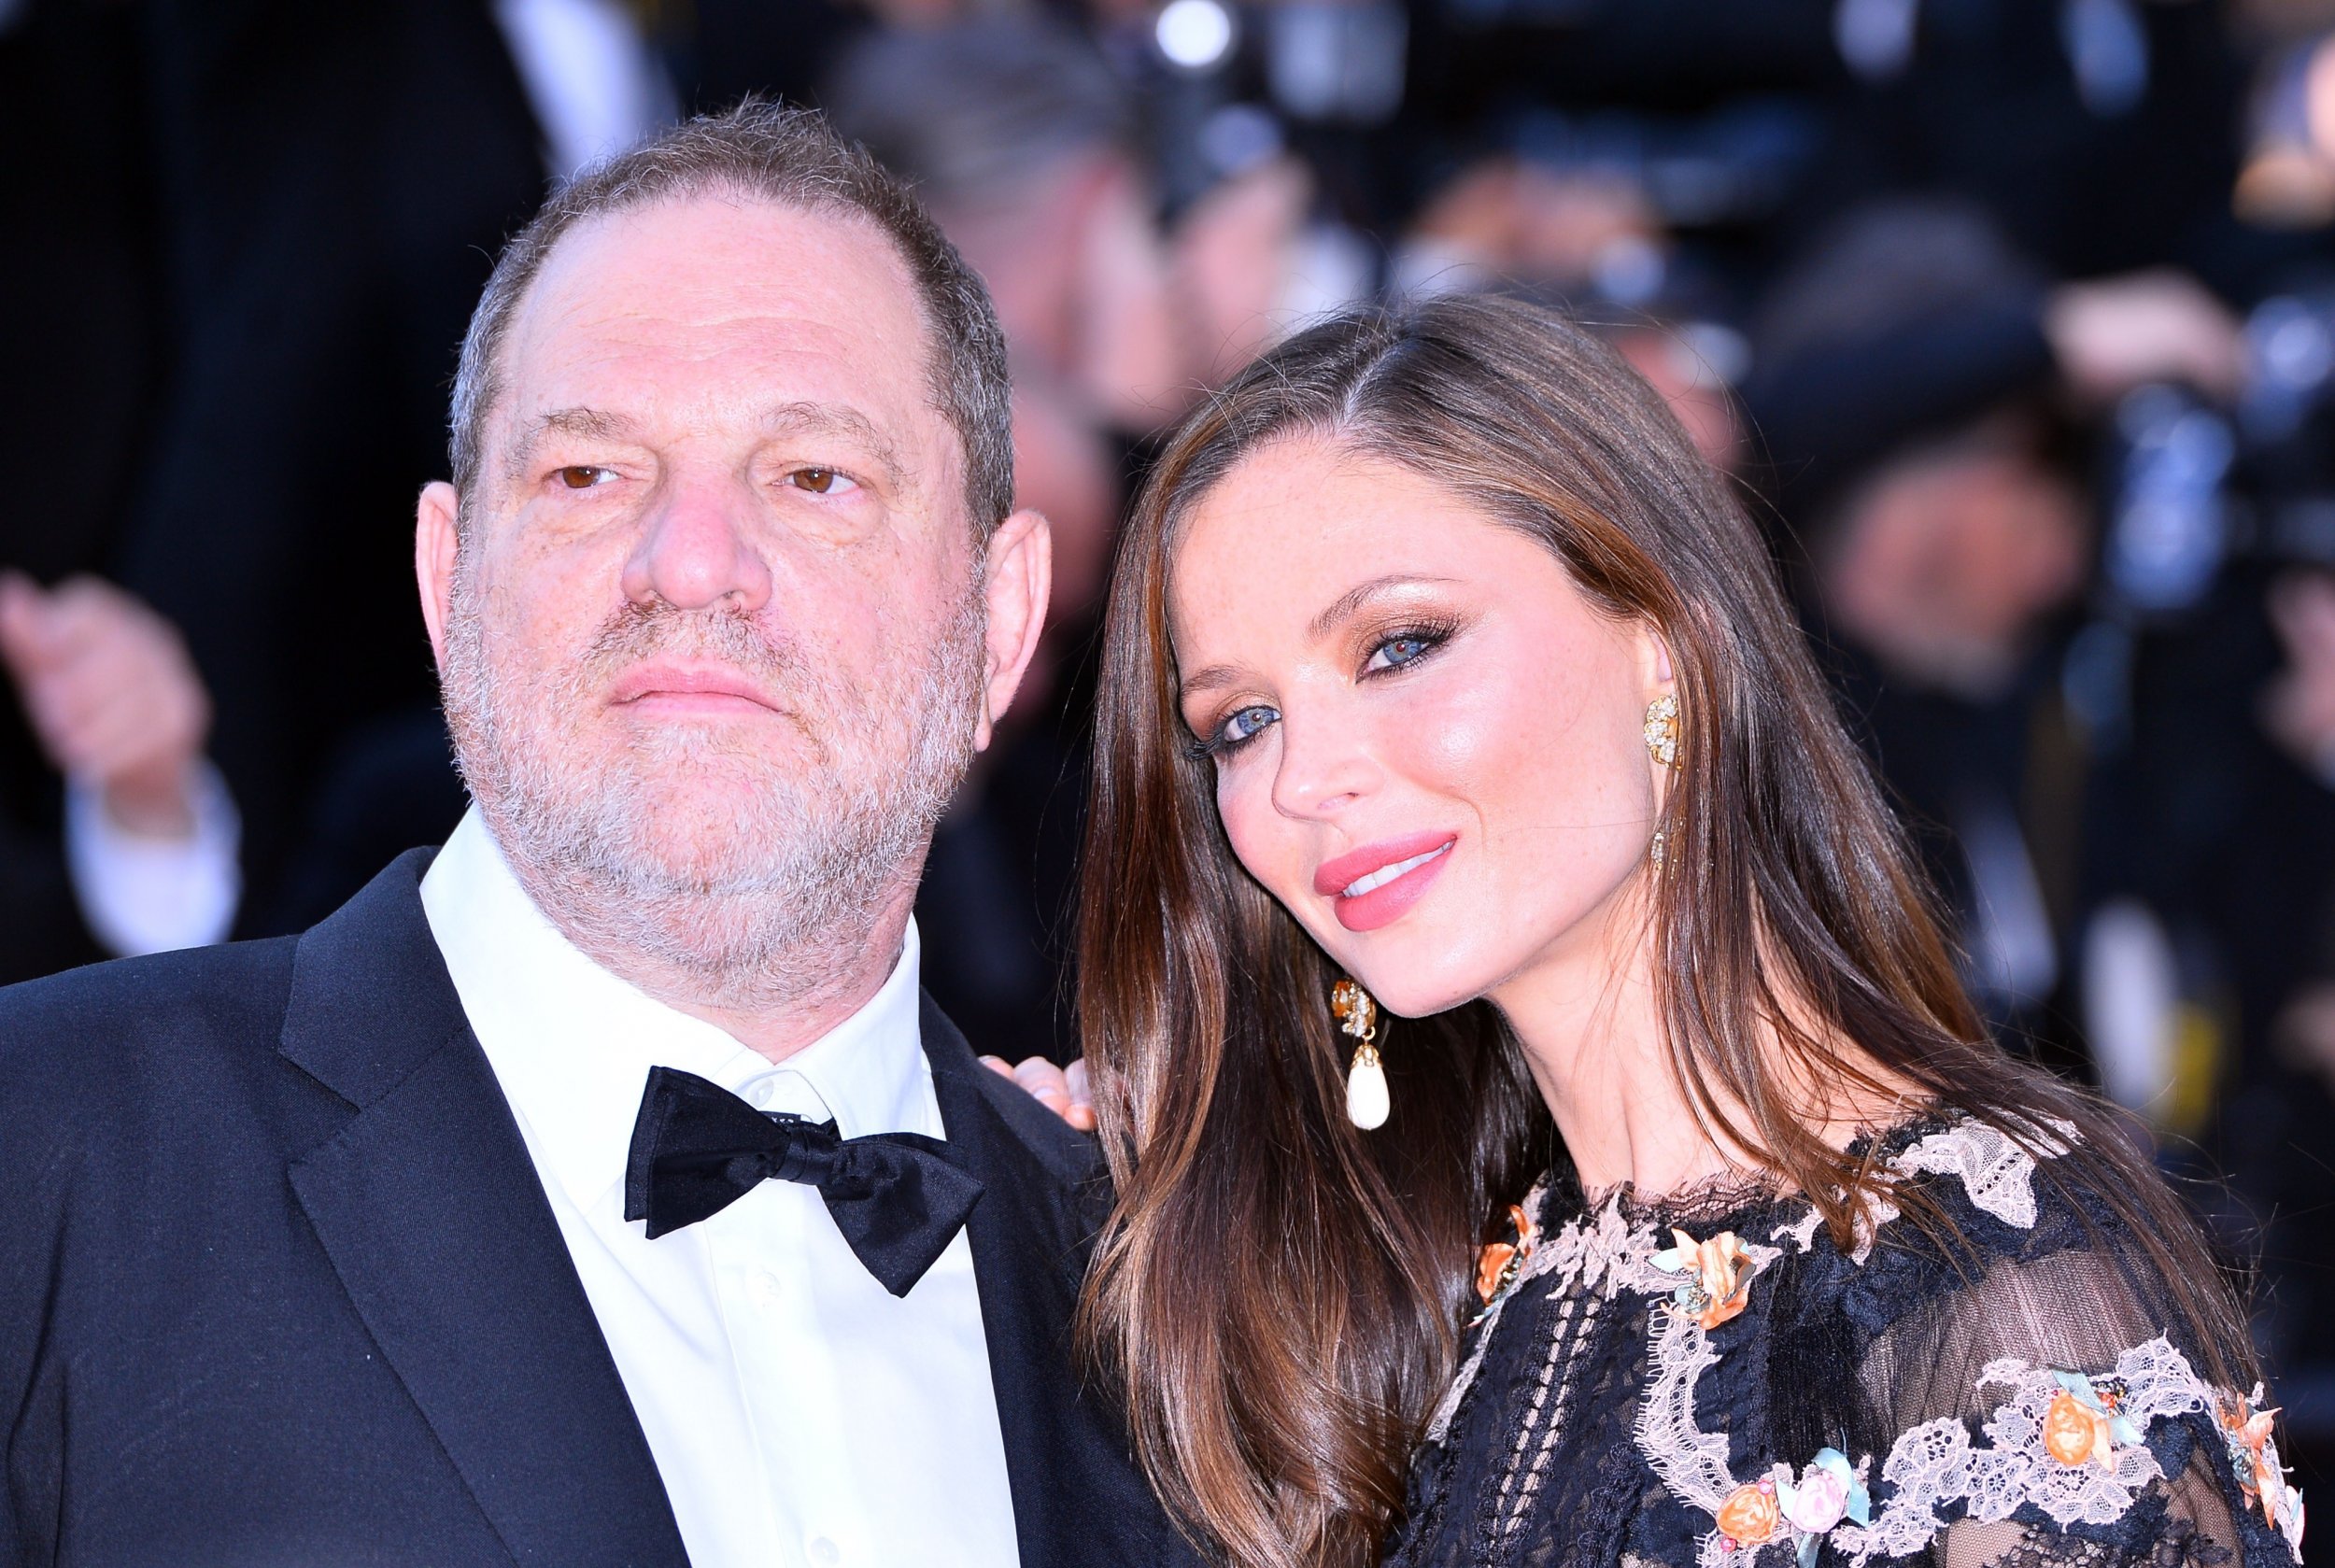 Weinstein Becomes Second Person Ever To Be Kicked Out Of Film Academy After Sexual Assault Claims